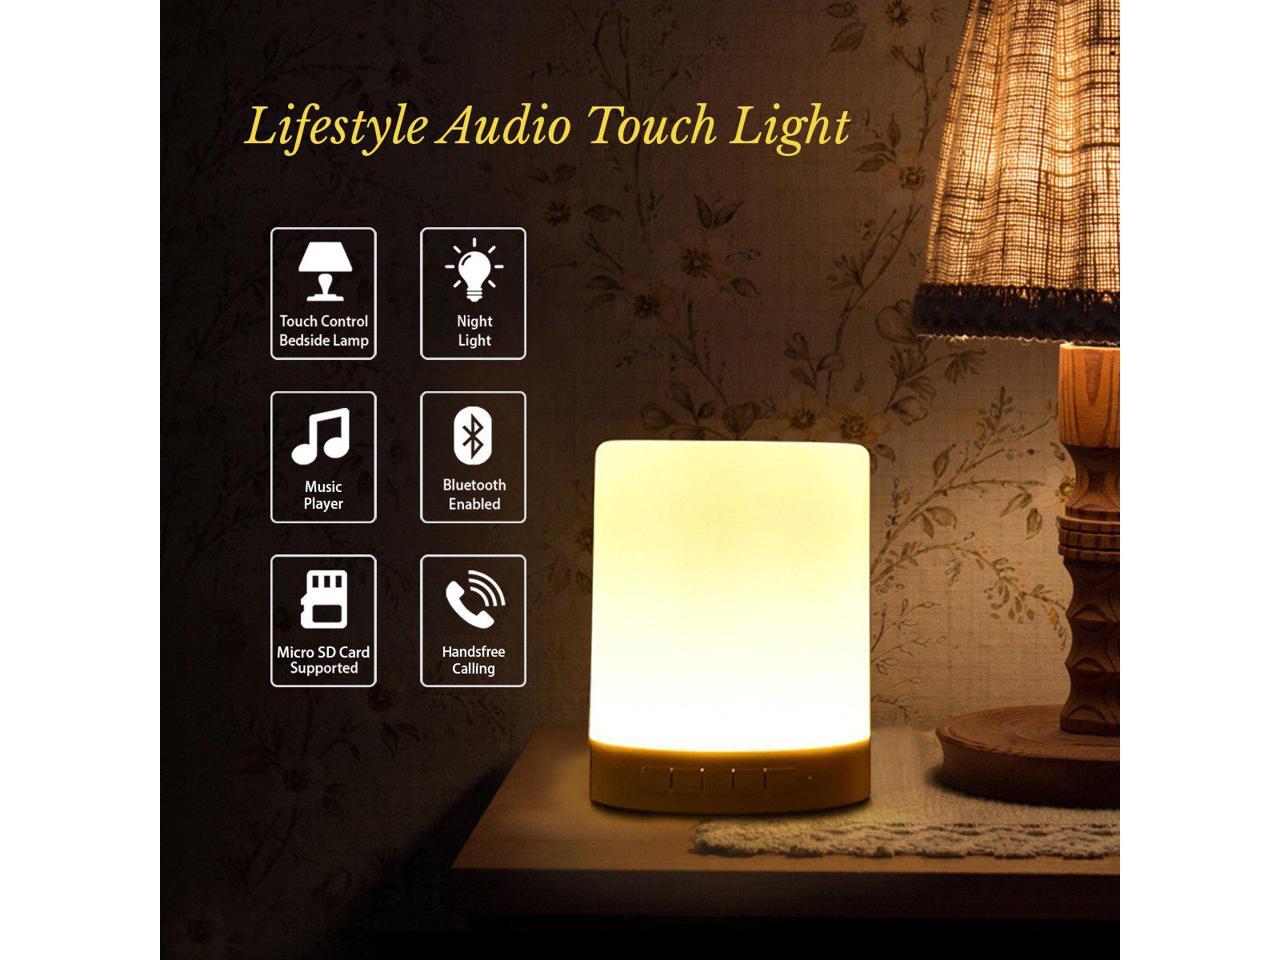 Wireless Bluetooth Stereo Speaker Touch Portable Night Light New Led night lamp